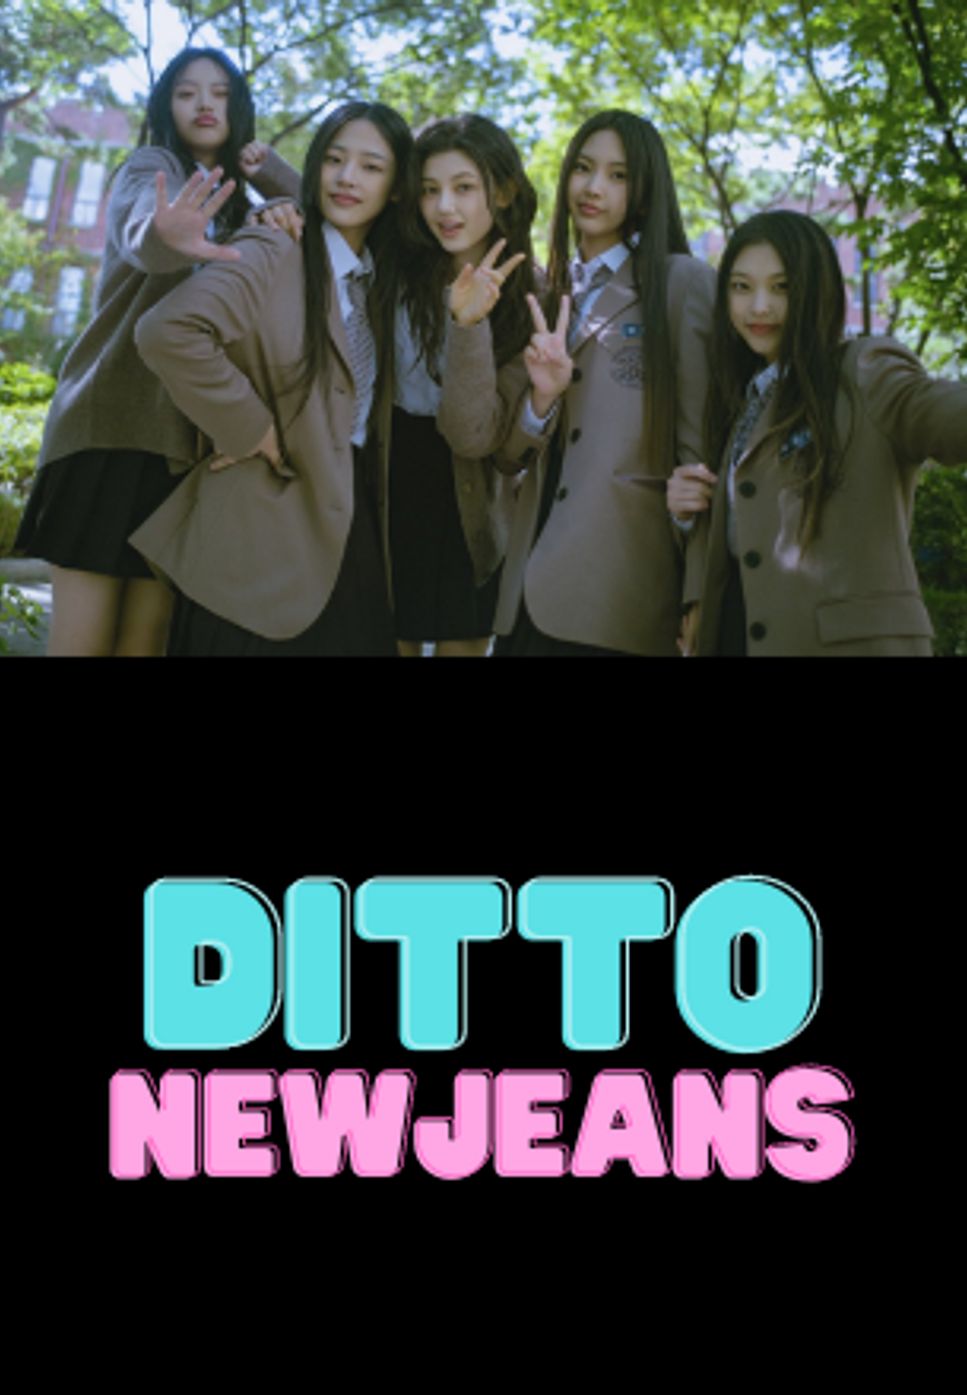 NewJeans Ditto Who's Who